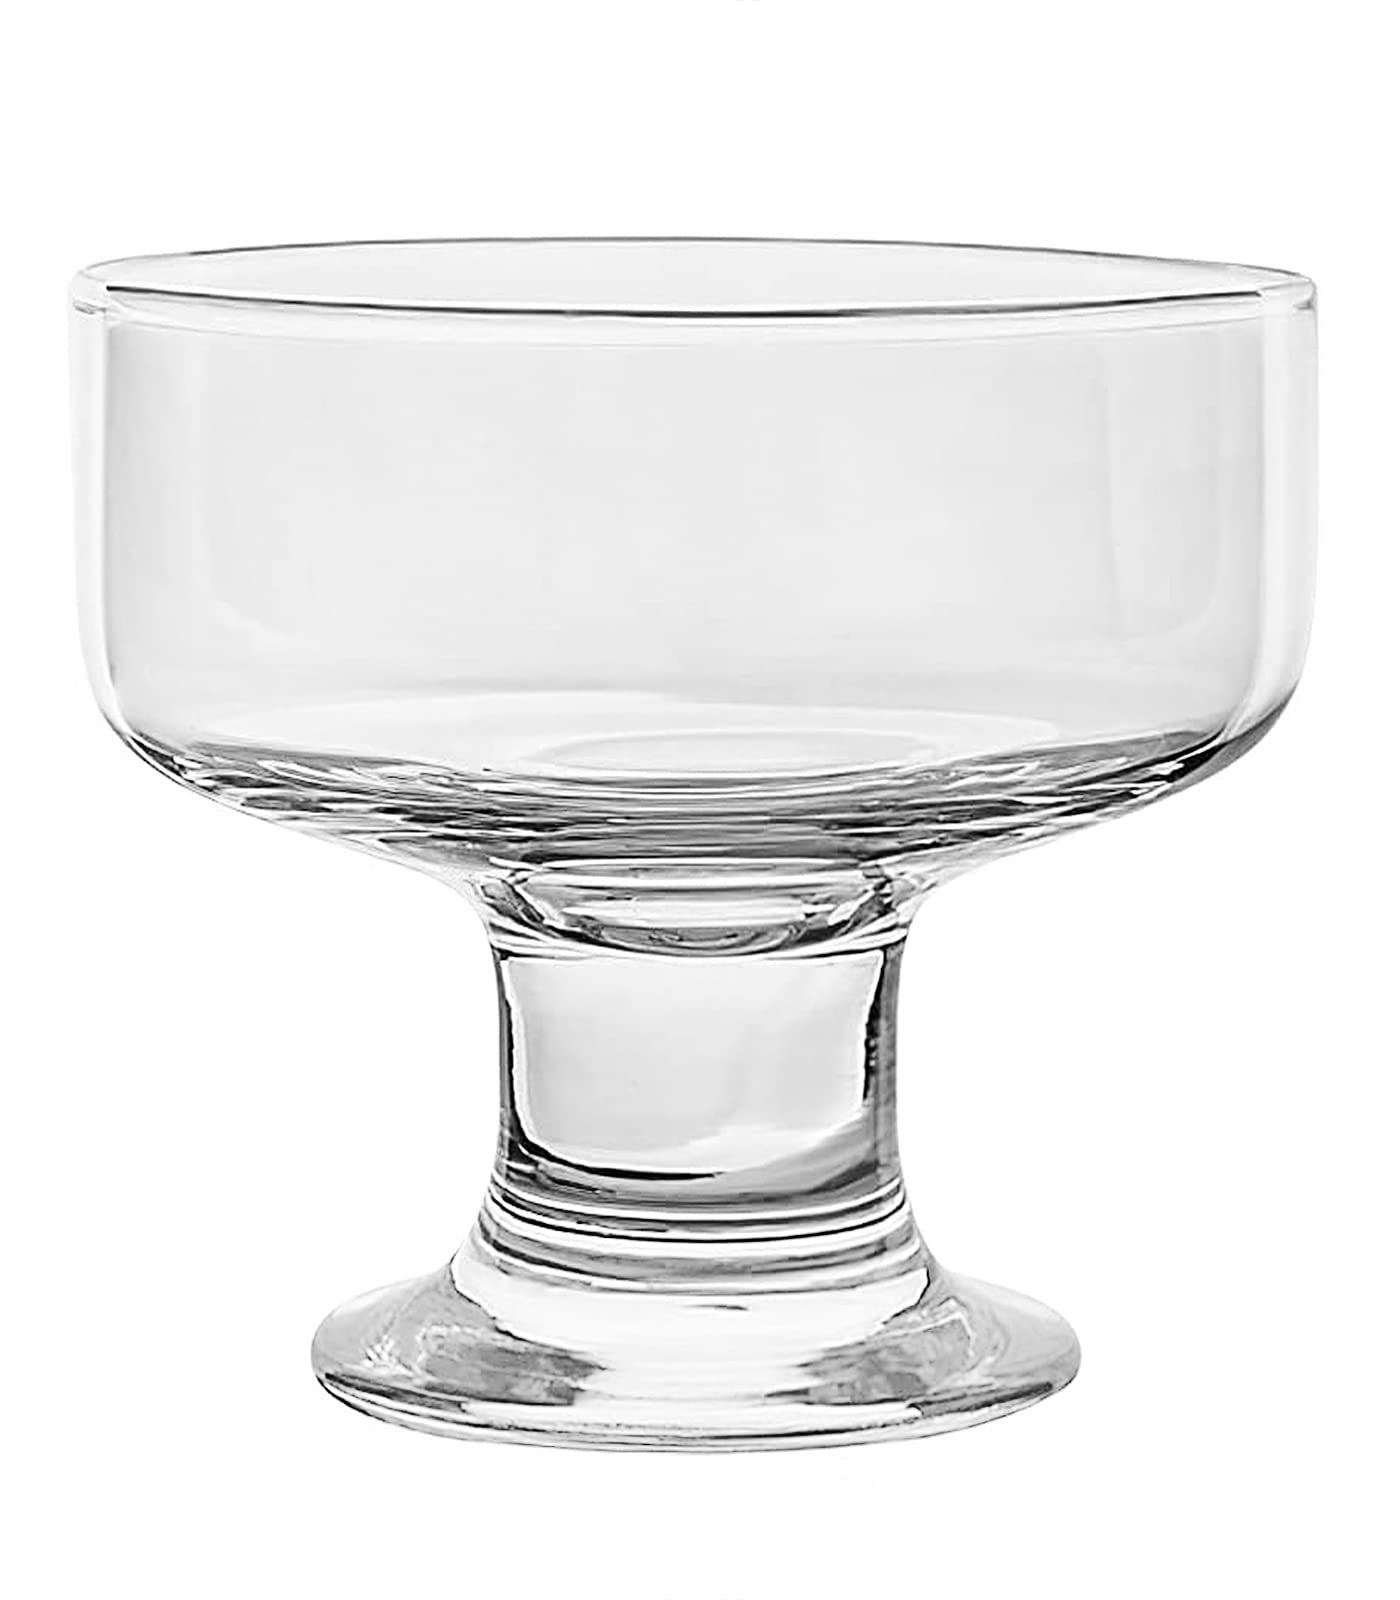 250ml/ 8.8 oz Dessert Bowl Crystal Glass Sundae Ice Cream Bowl Clear Glass Fruit Parfait Cup Mini Footed Dessert Cups for Ices Pudding Fruit Snack Cereal Nuts Cocktail Drinks Party, Dishwasher Safe